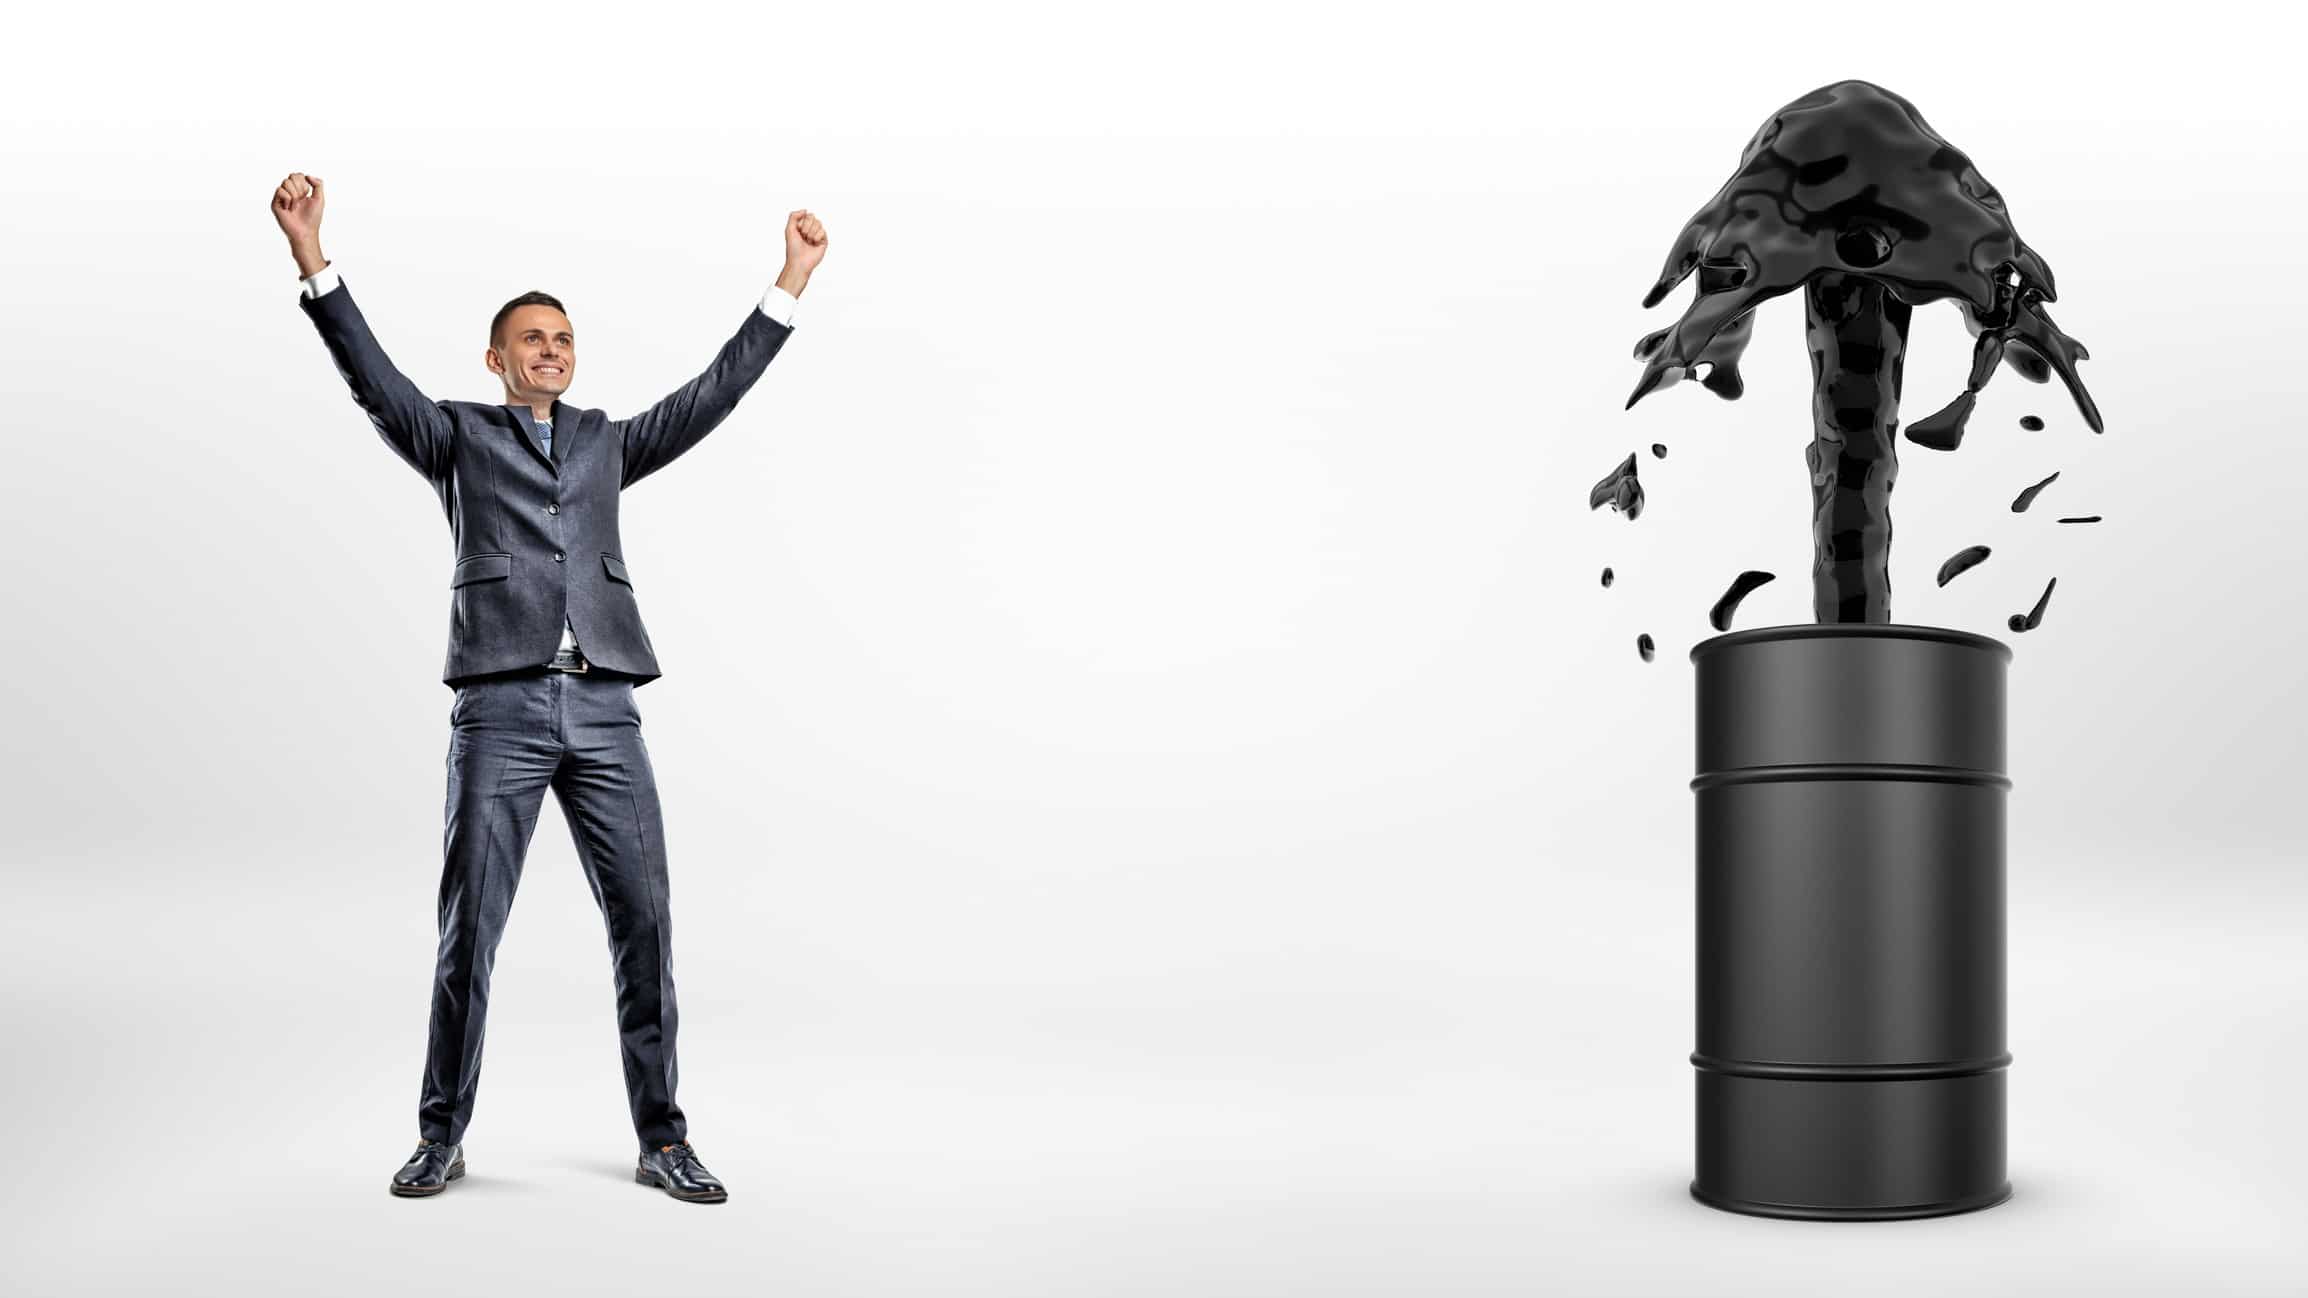 rising asx oil share price buy represented by business man celebrating next to oil barrel erupting with up arrow